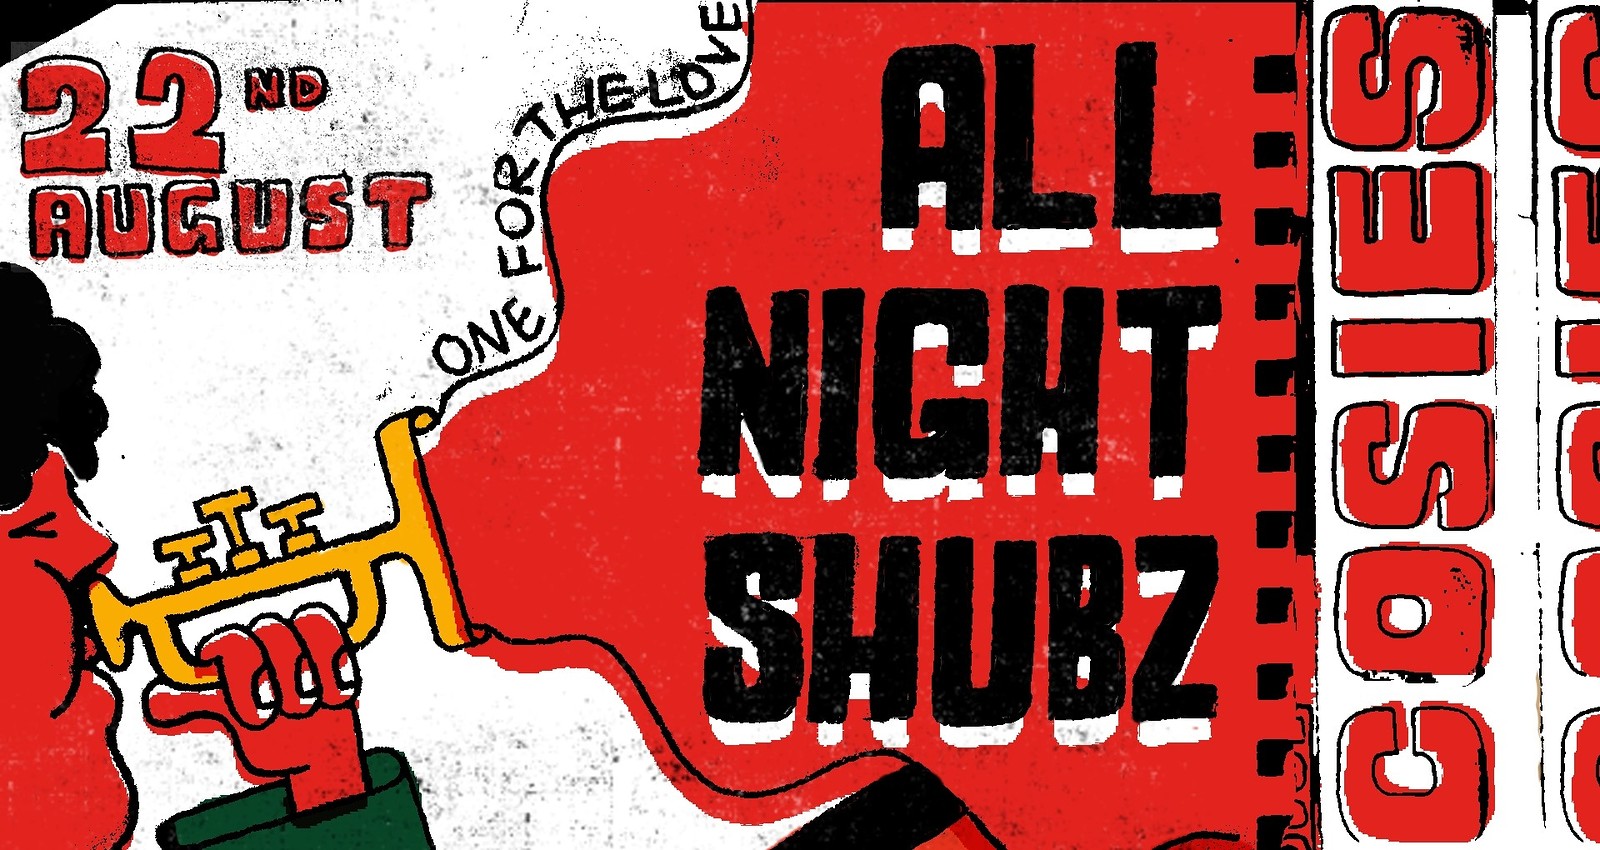 All Night Shubz // The Big Peoples Dance at Cosies